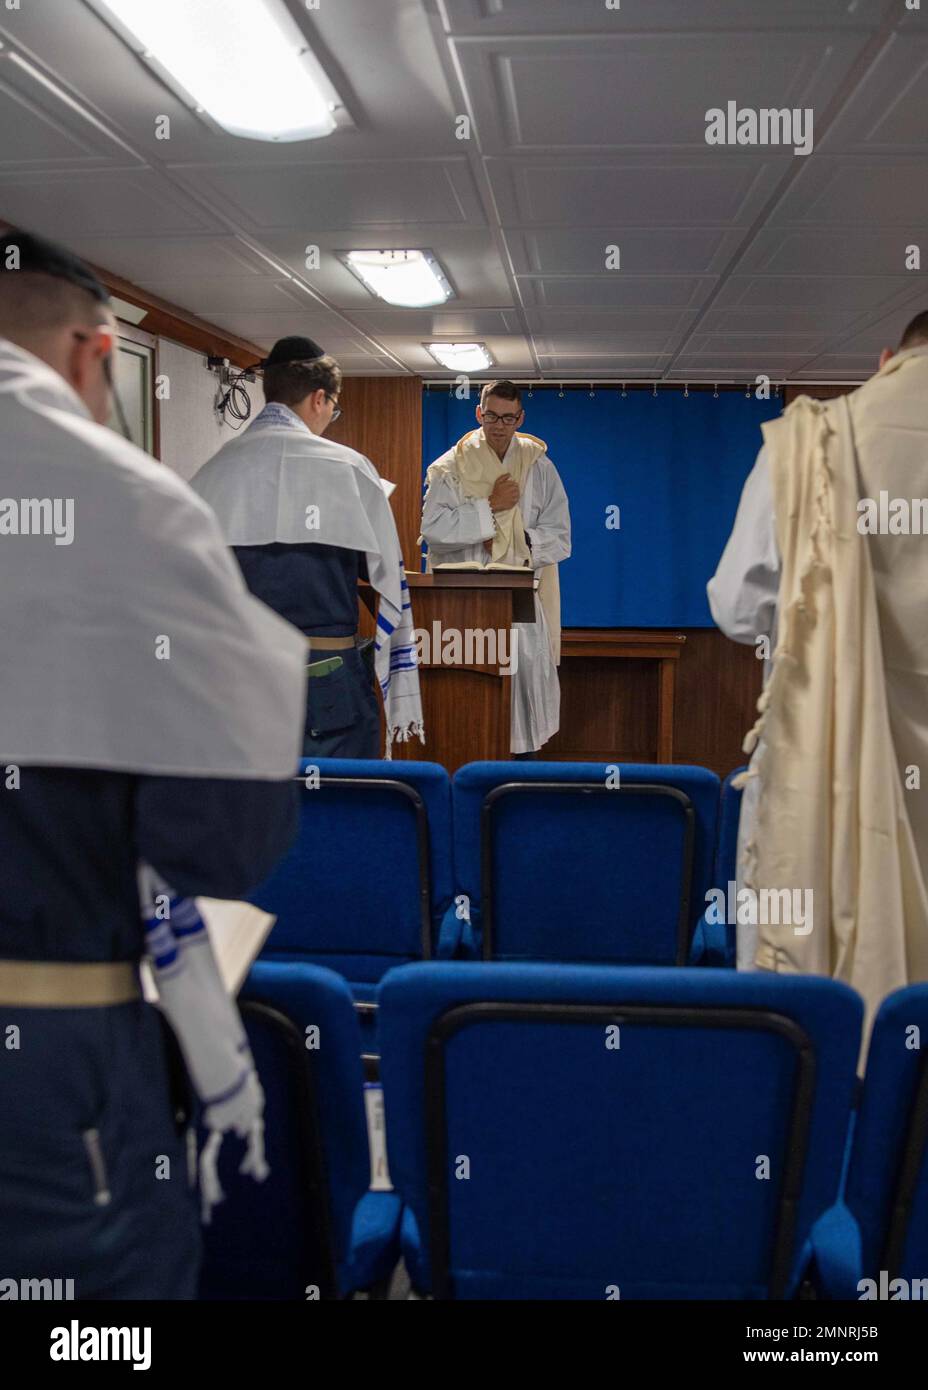 U.S. Navy Chaplain Rabbi Lt. Cmdr. Yonatan Warren, middle, from Norfolk, Virginia, joined the crew of the first-in-class aircraft carrier USS Gerald R. Ford (CVN 78) to celebrate the Jewish High Holy days and conduct Yom Kippur services in the ship’s chapel, Oct. 5, 2022. The Gerald R. Ford Carrier Strike Group (GRFCSG) is deployed in the Atlantic Ocean, conducting training and operations alongside NATO Allies and partners to enhance integration for future operations and demonstrate the U.S. Navy’s commitment to a peaceful, stable and conflict-free Atlantic region. Stock Photo